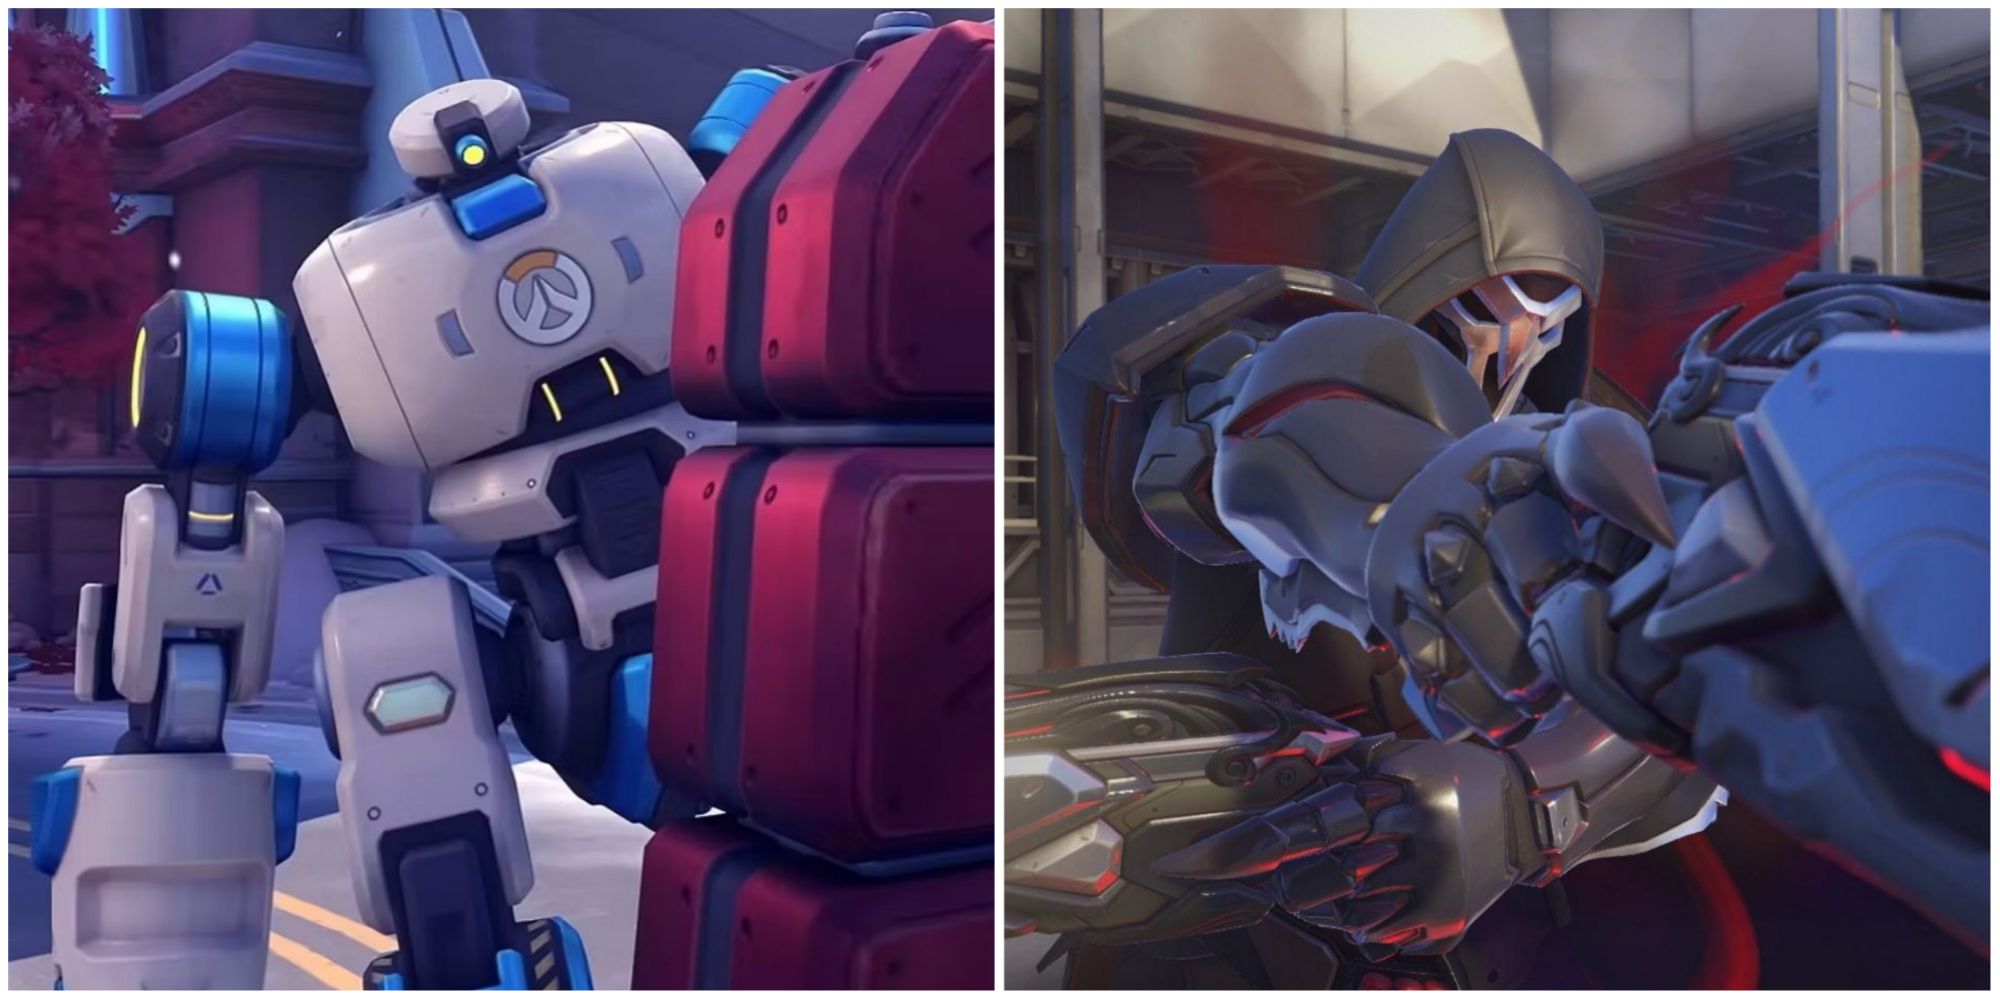 The Push robot and Reaper in Overwatch 2.